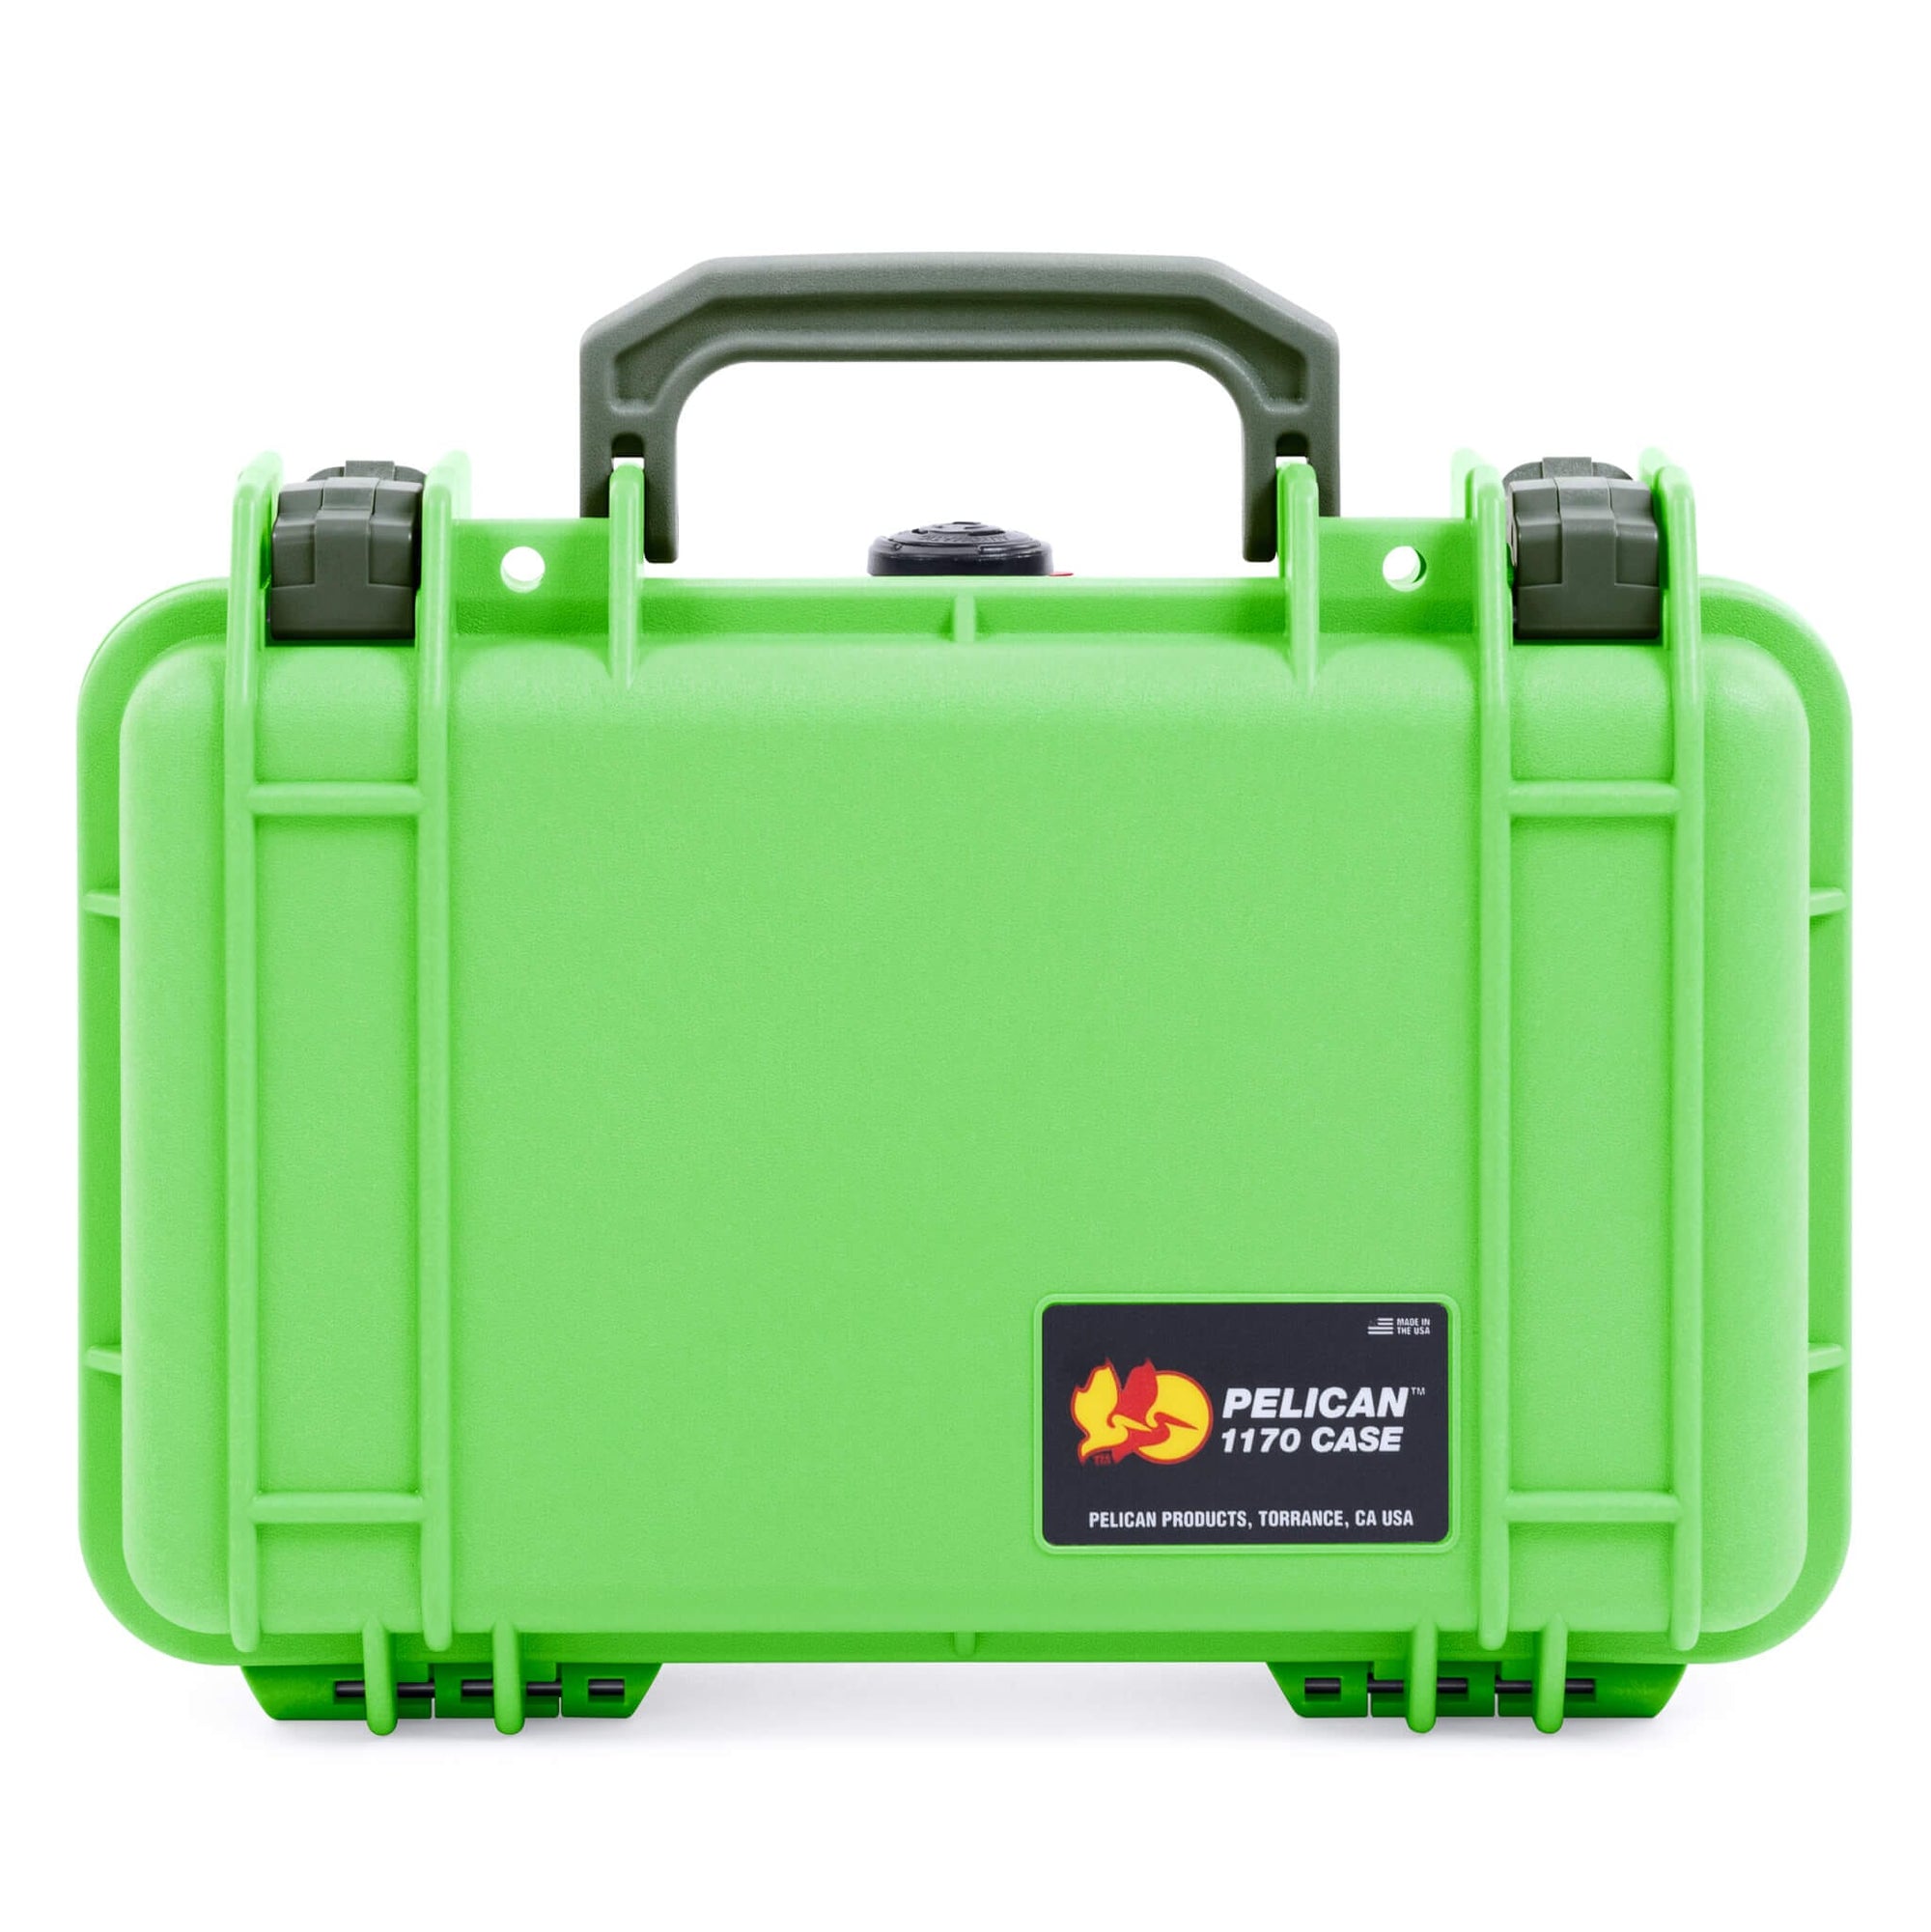 Pelican 1170 Case, Lime Green with OD Green Handle & Latches ColorCase 